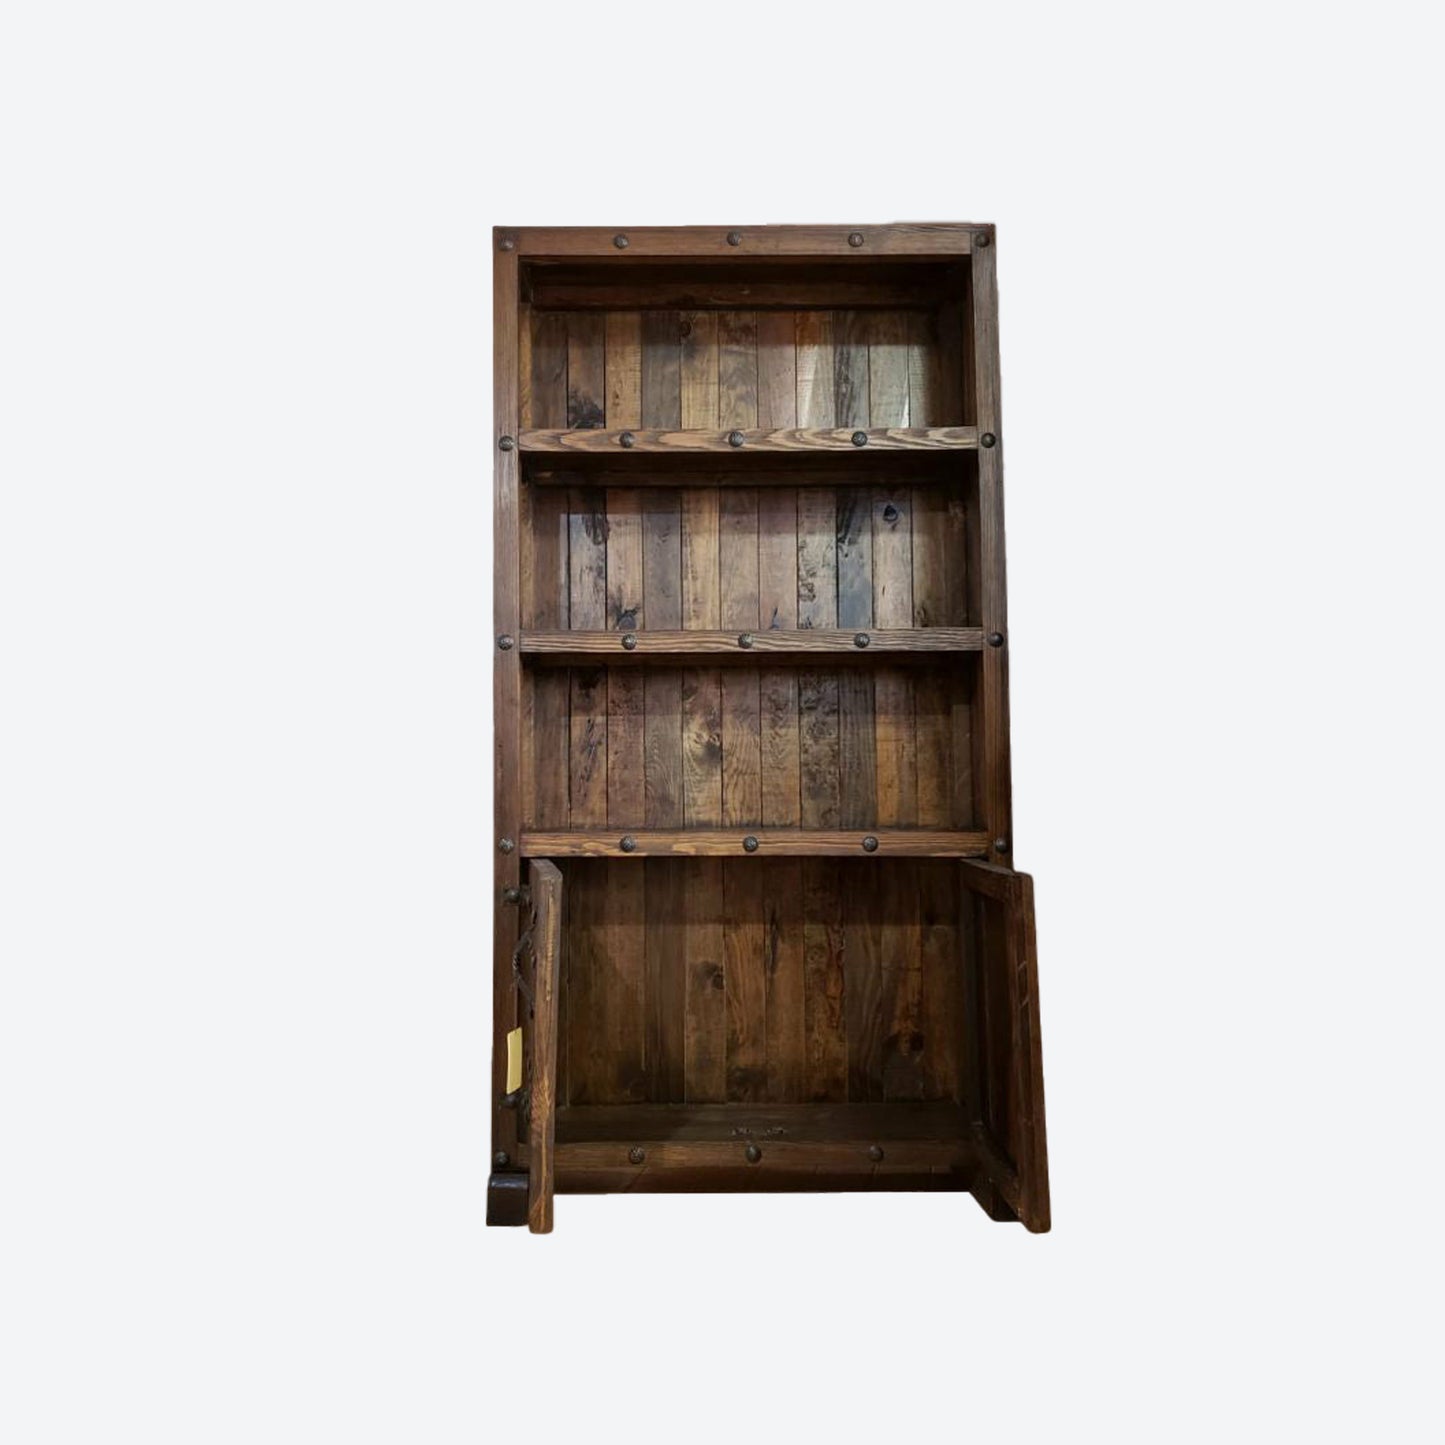 OAK WOOD CABINET WITH DRAWERS AND HAMMERED ACCENTS -SK (SKU 1017)